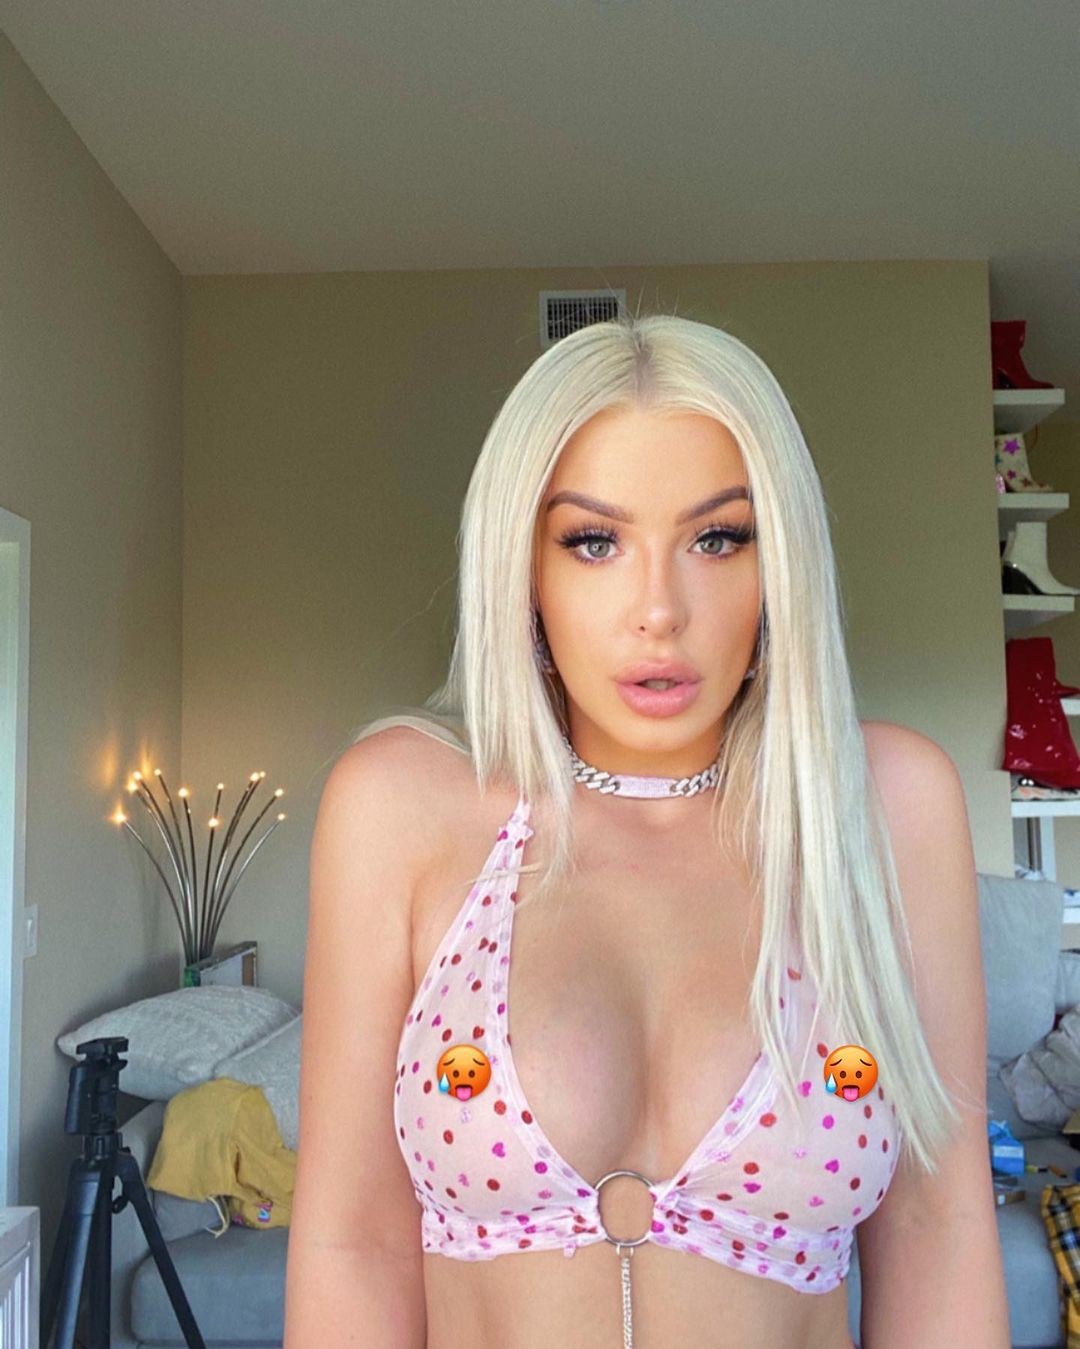 Tana Mongeau Topless Sexy TheFappening.Pro 58 - Tana Mongeau Topless And Sexy (73 Photos)